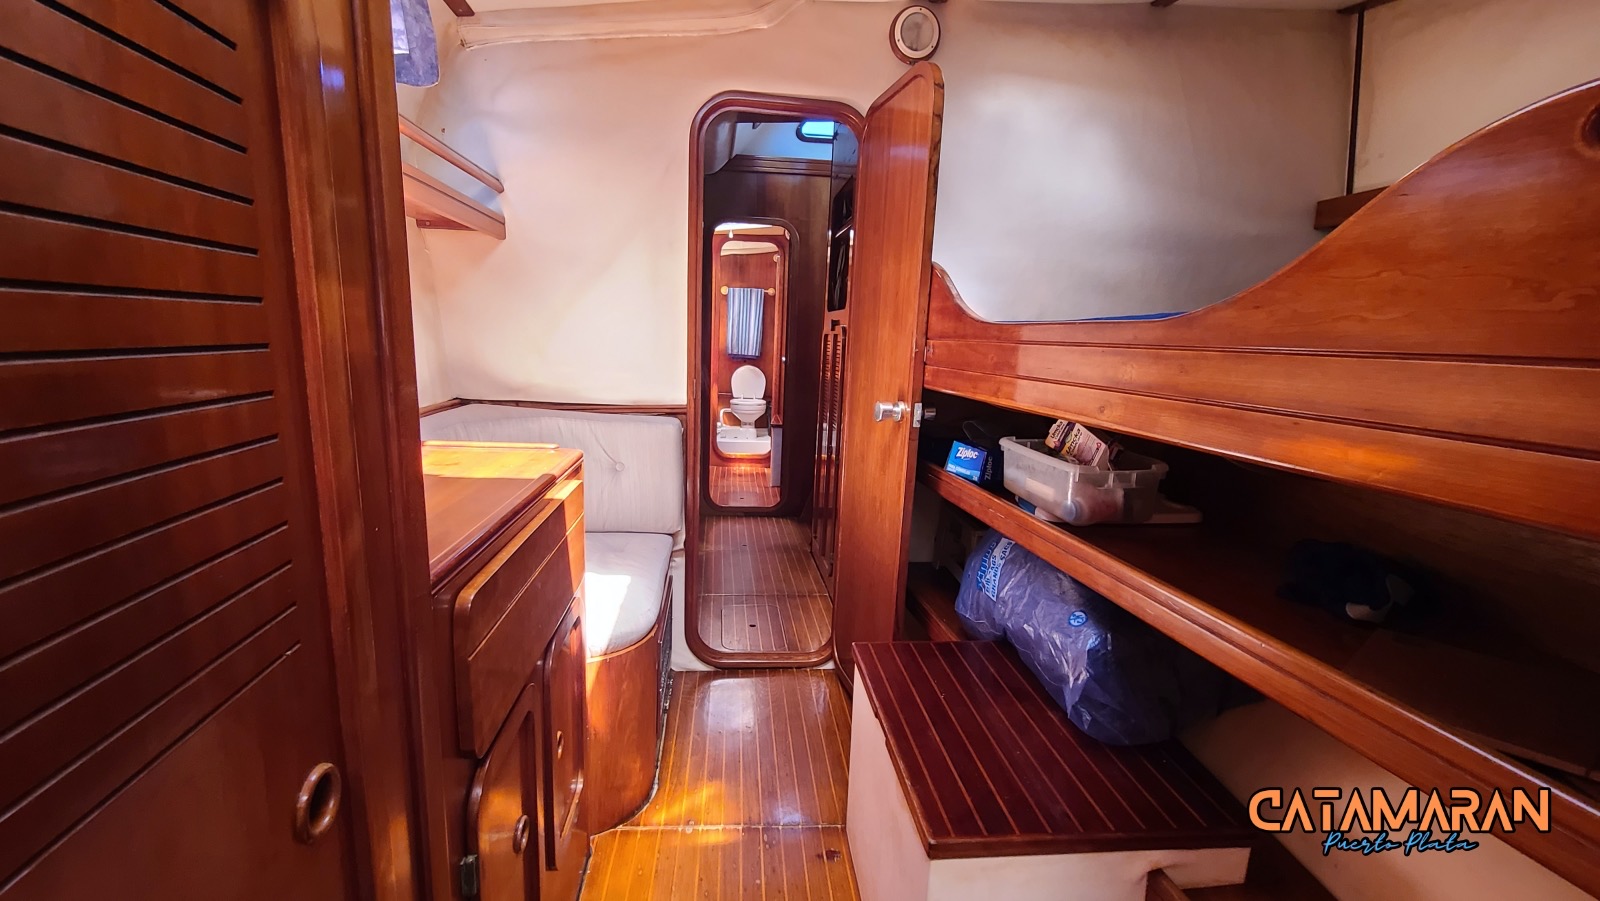 Another berth with bunk beds